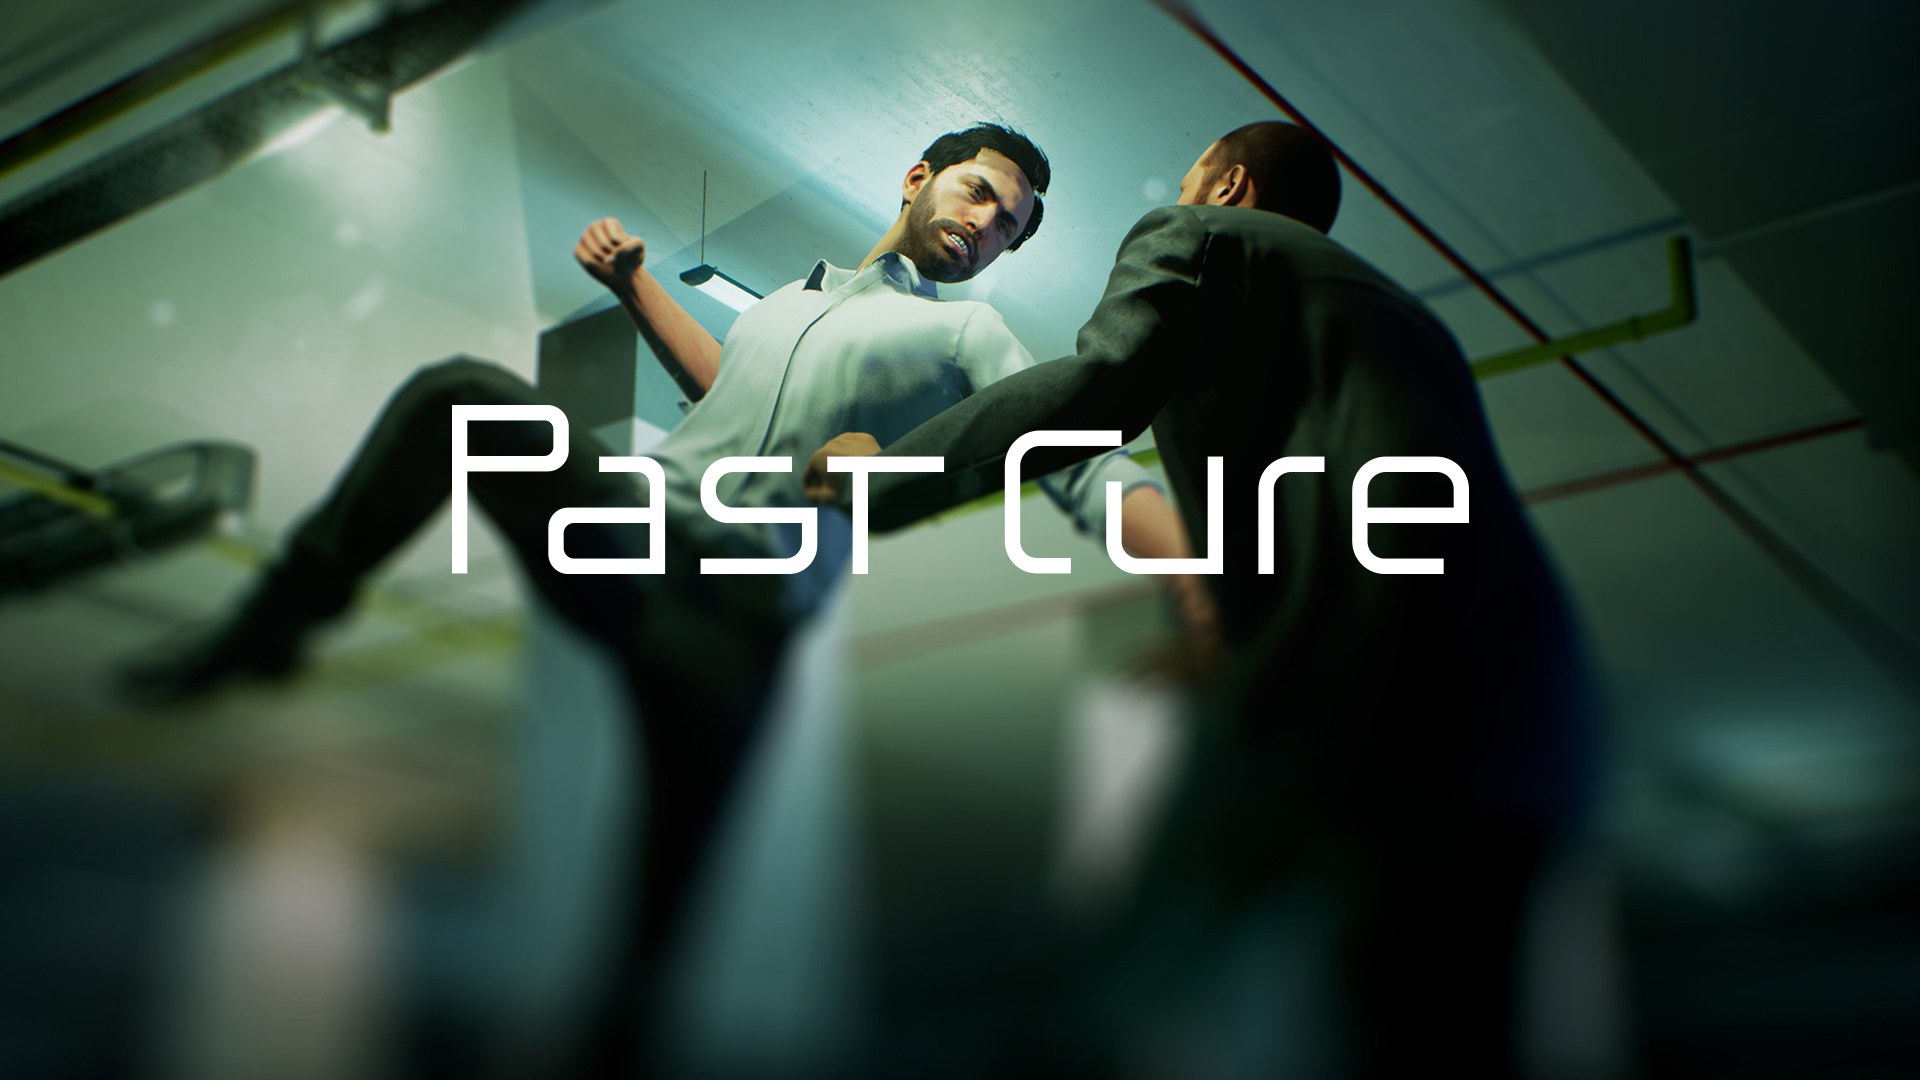 PAST CURE by independent studio Phantom 8 comes to PS4 and PC